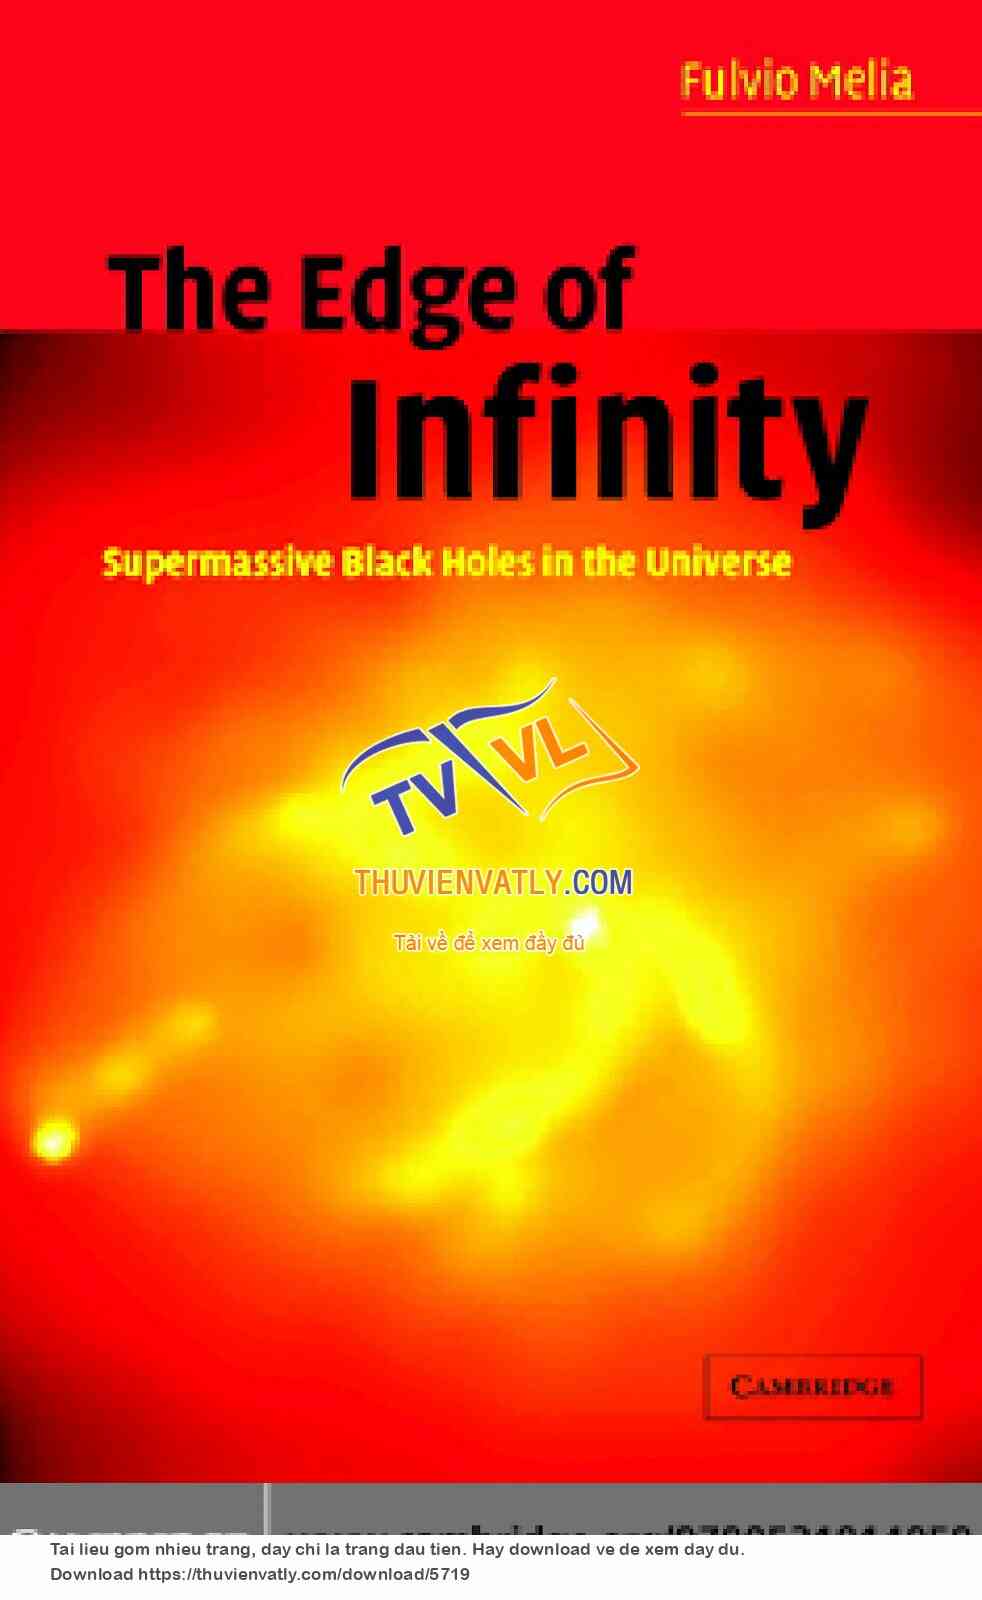 The Edge of Infinity - Supermassive Black Holes in the Universe